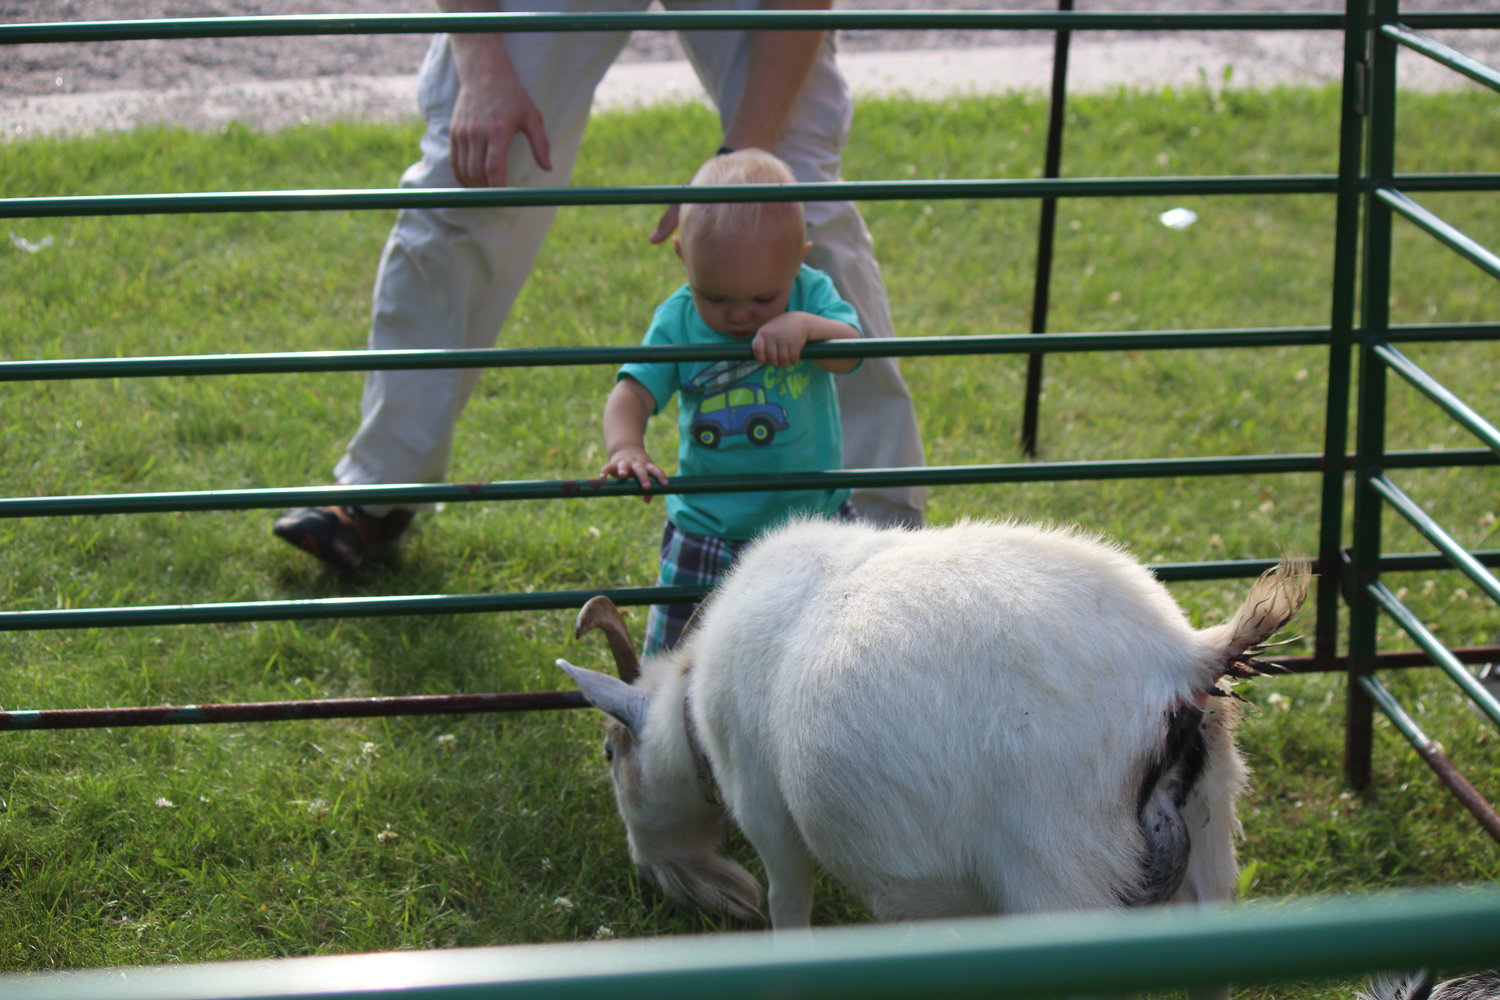 Timothy Carlson, almost 1-year-old of Cook, curiously observes goats at the Cook’s Country Connection pop-up farm.